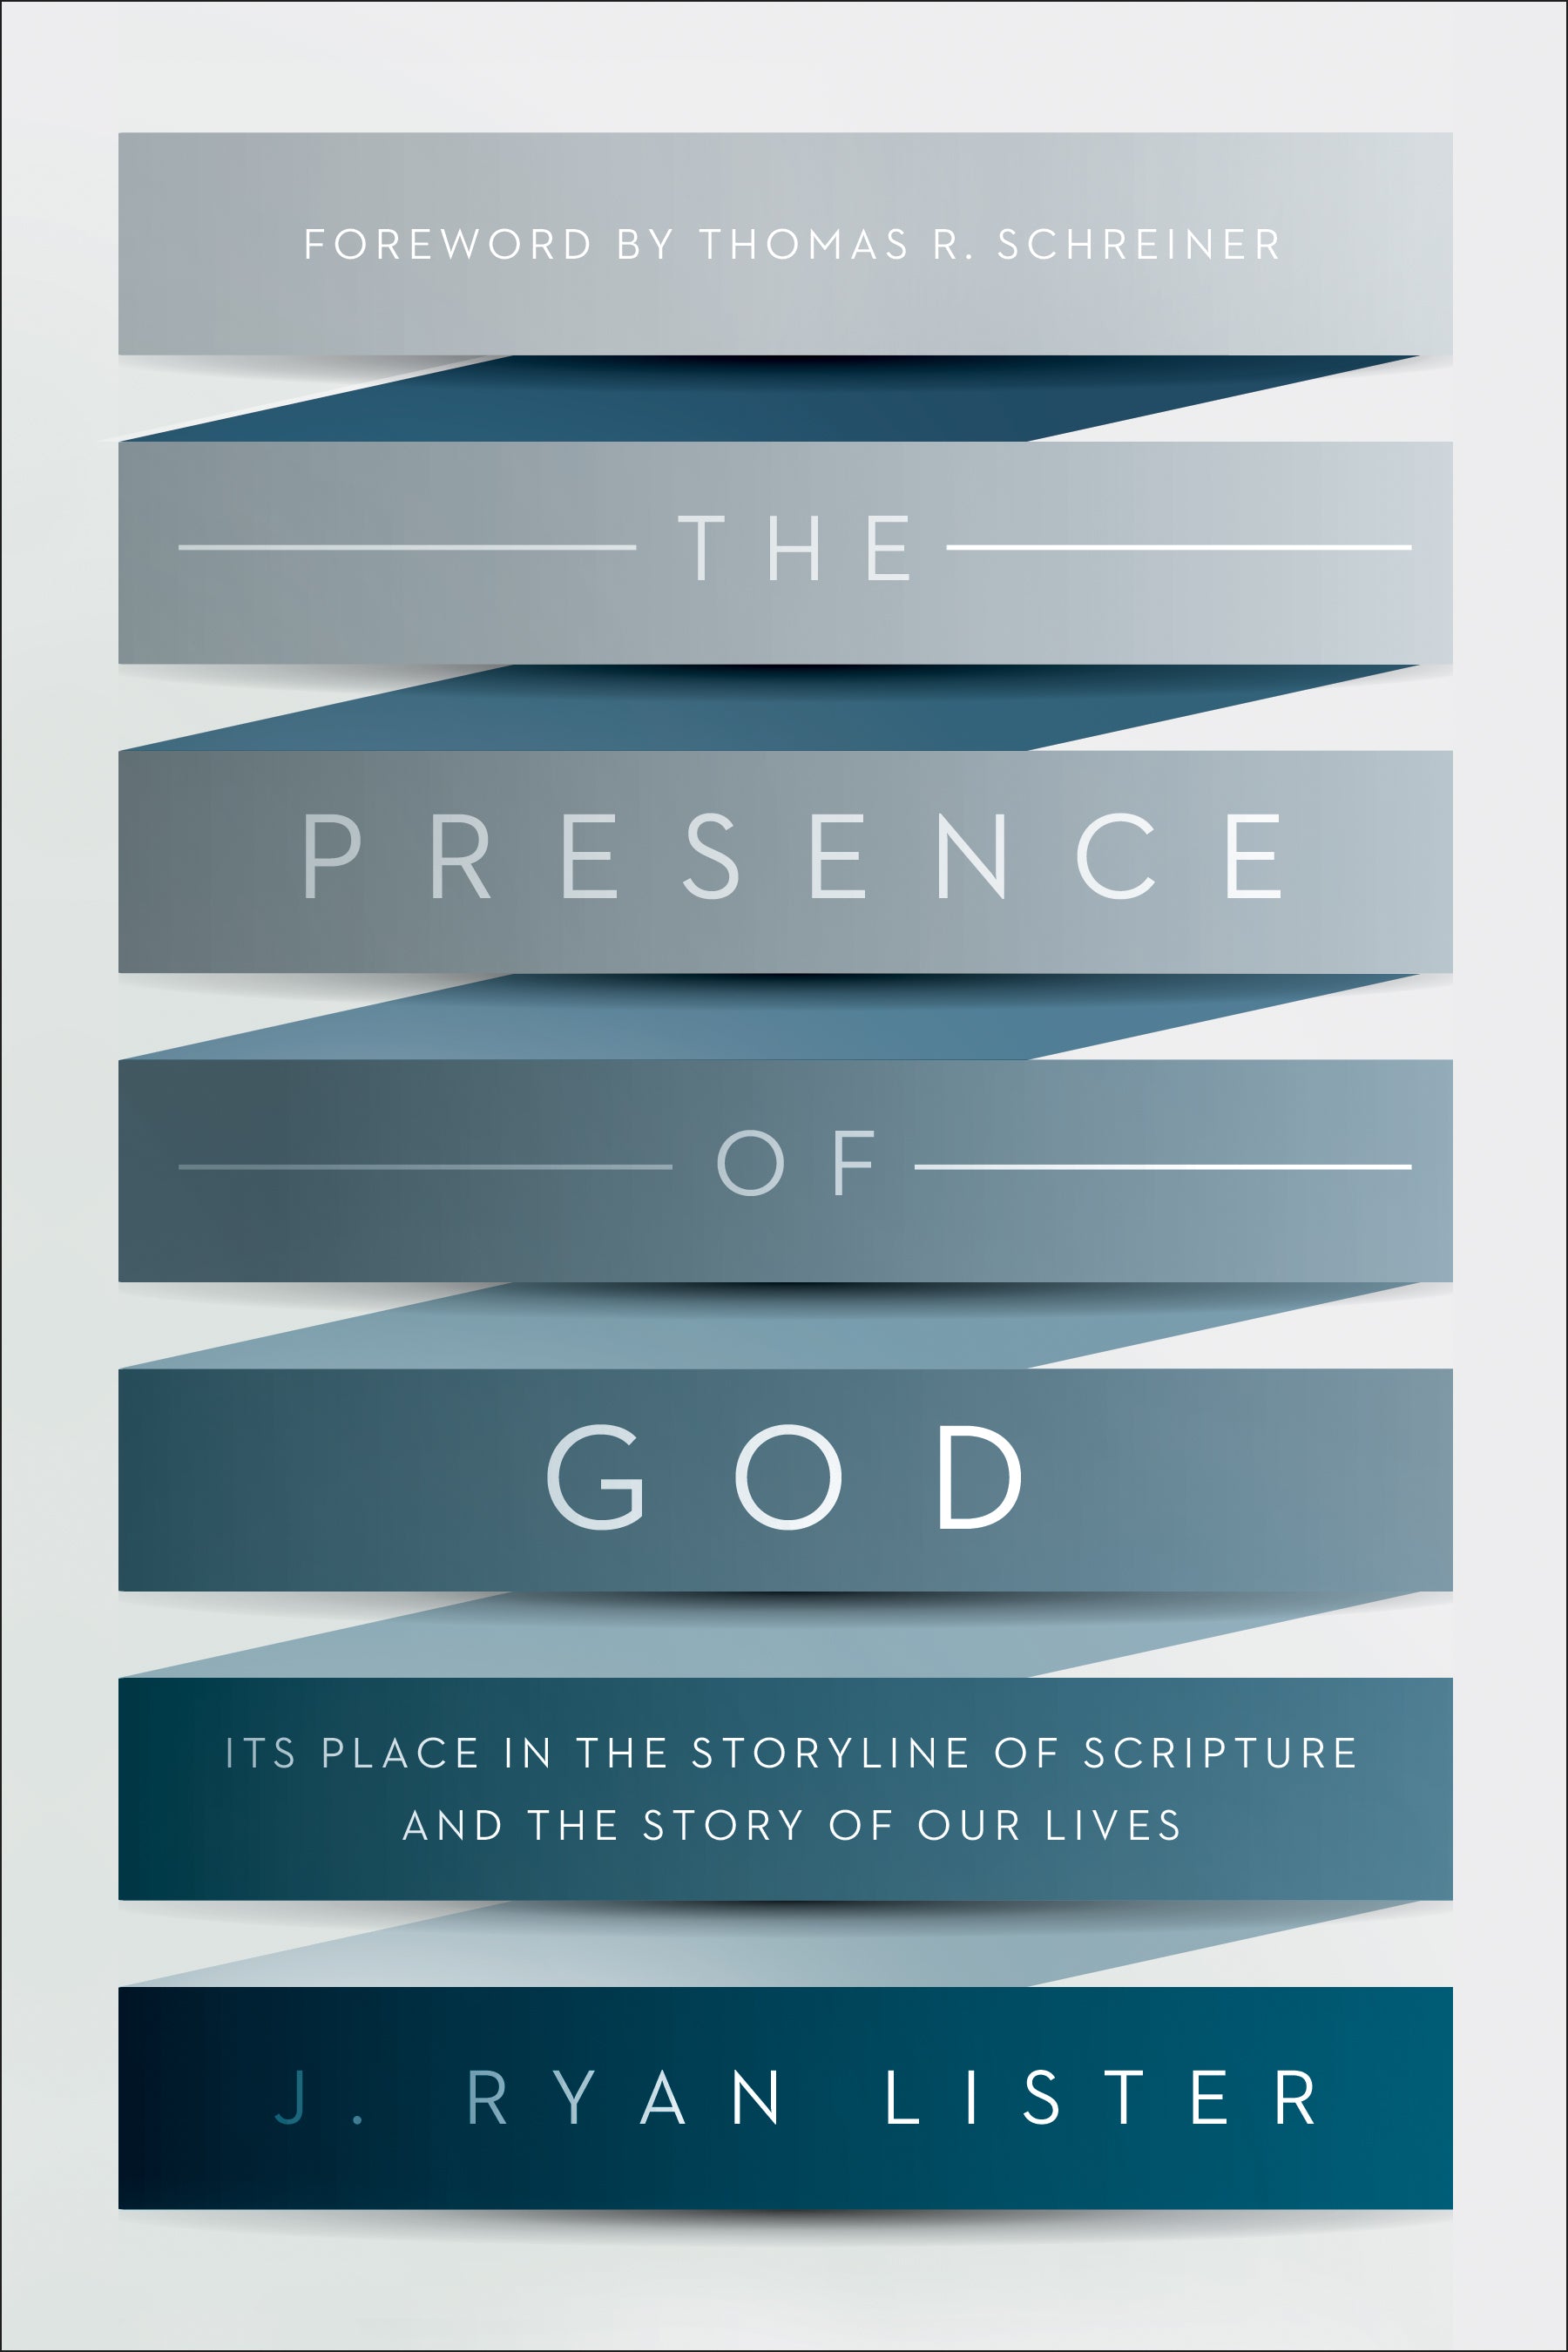 Image of The Presence of God other